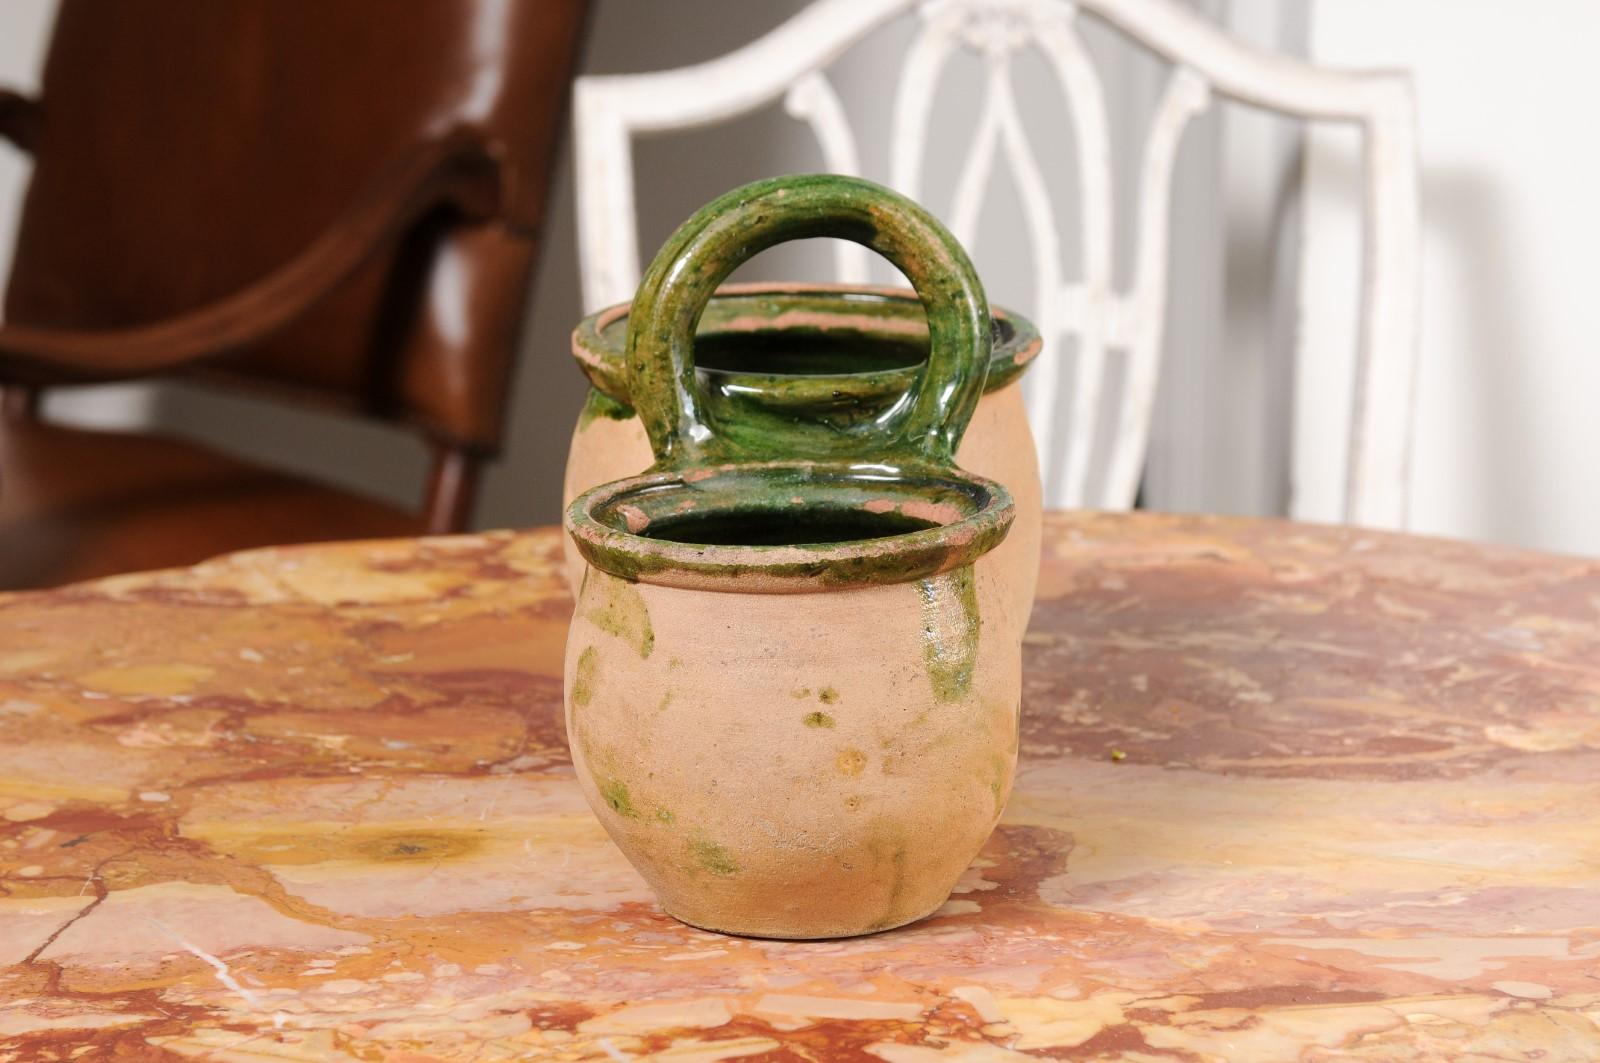 Green Glazed 19th Century Pottery Shepherd's Lunch Holder with Bowls and Handle For Sale 6